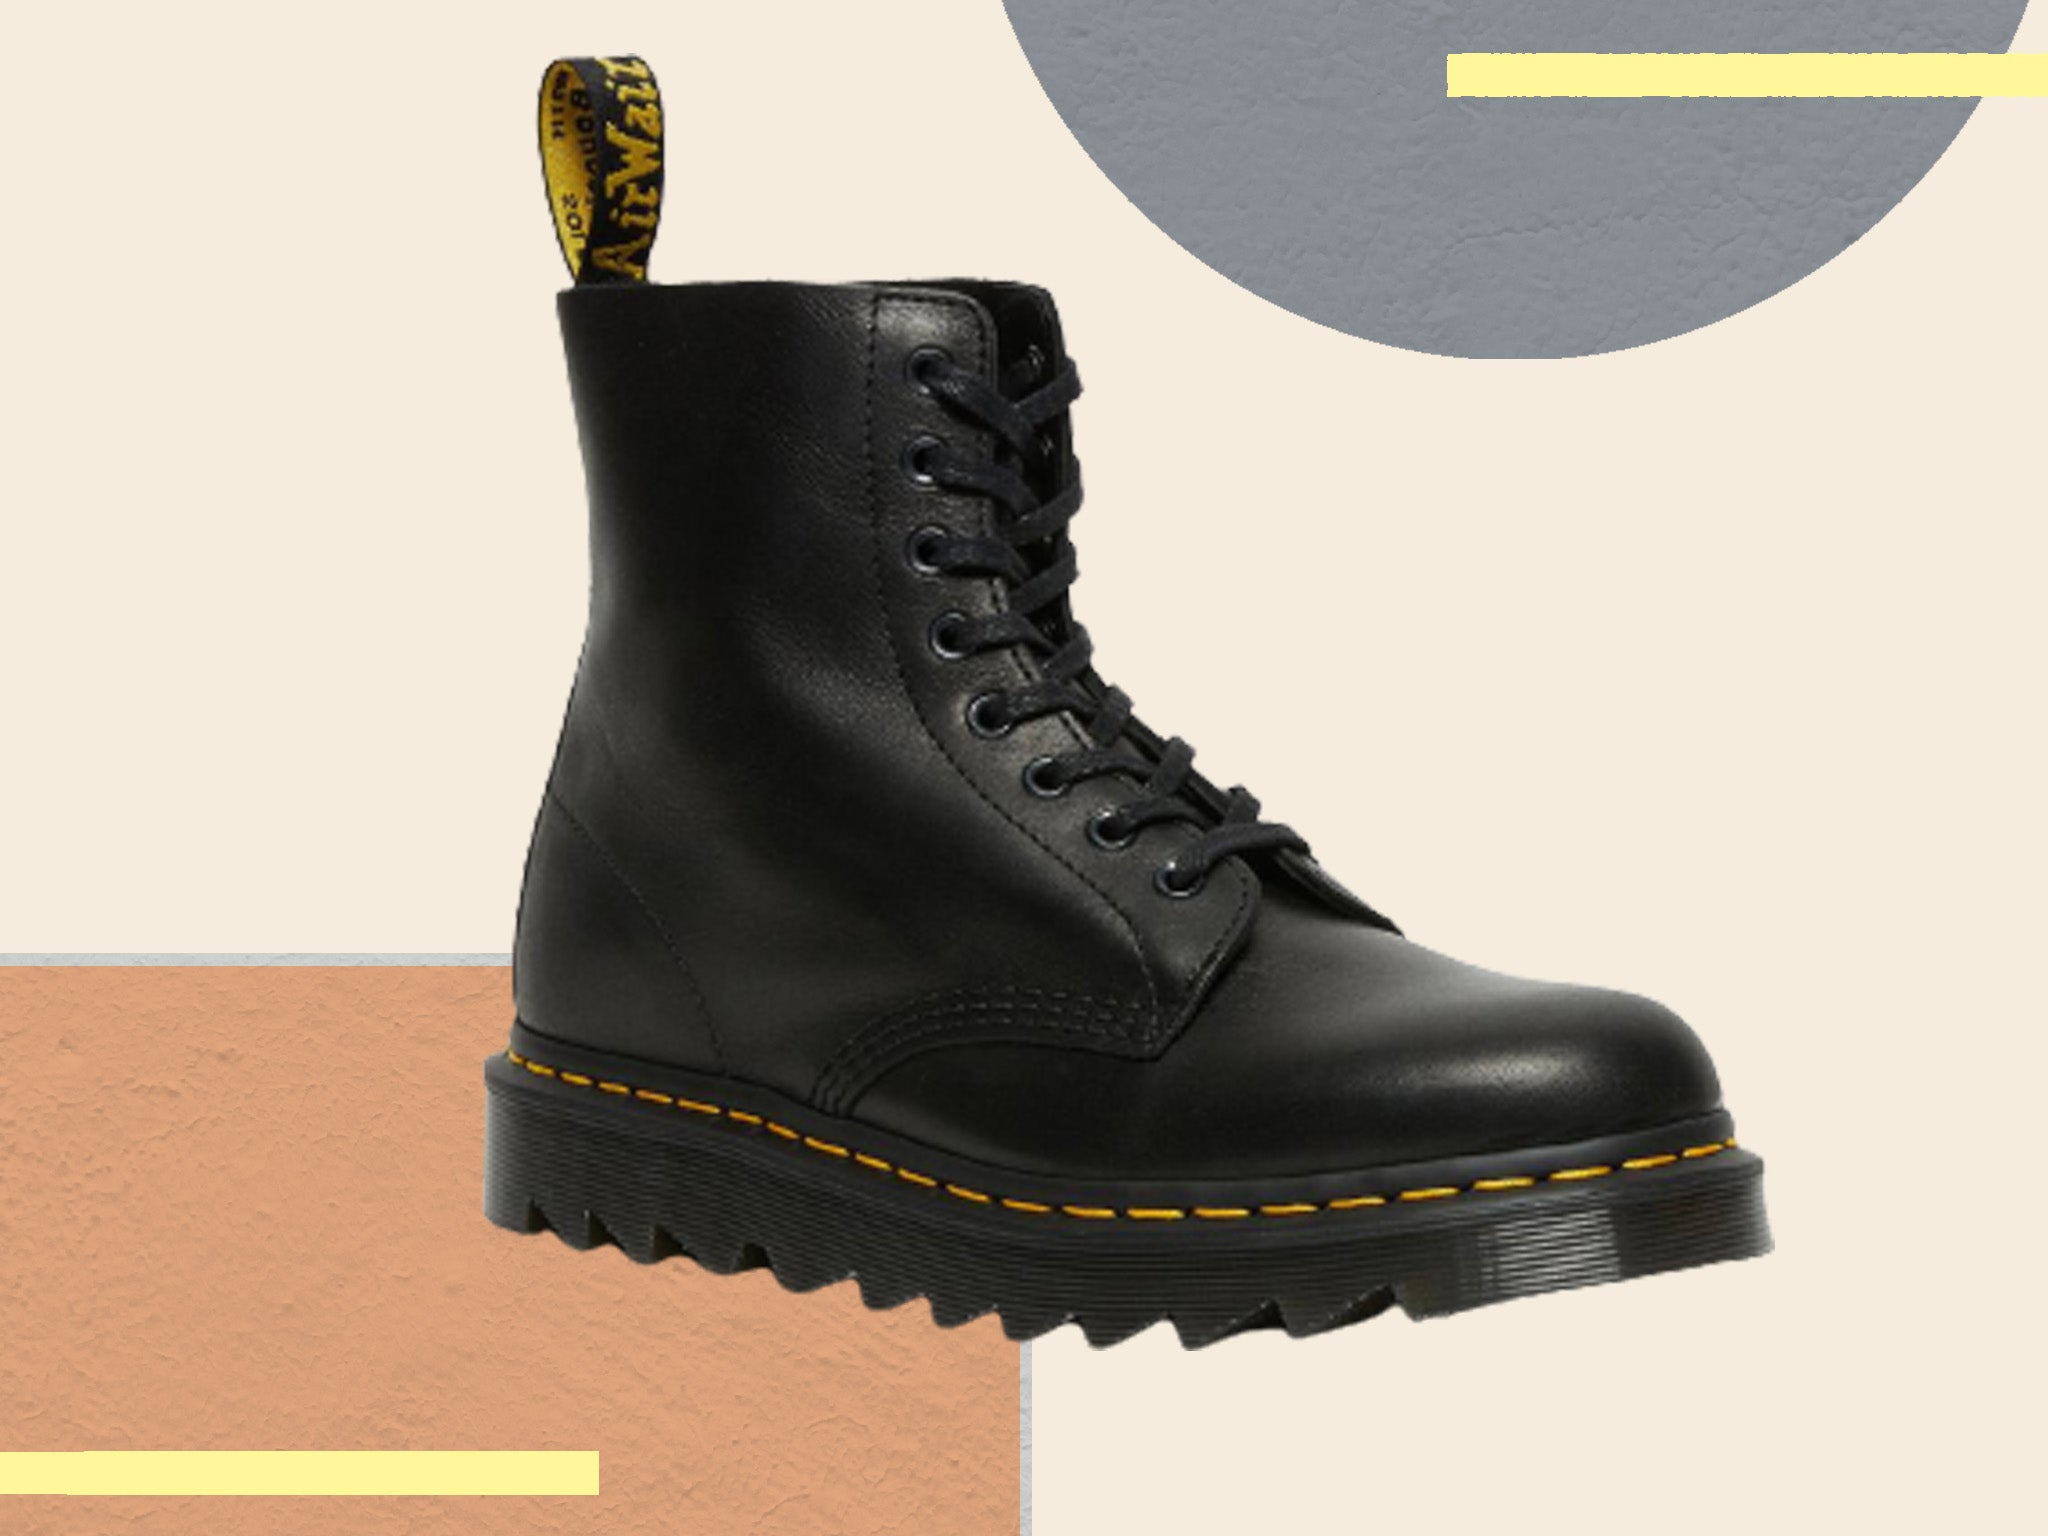 Dr Martens Black Friday 2021 deals: Save £50 on the brand's classic lace up  boots | The Independent